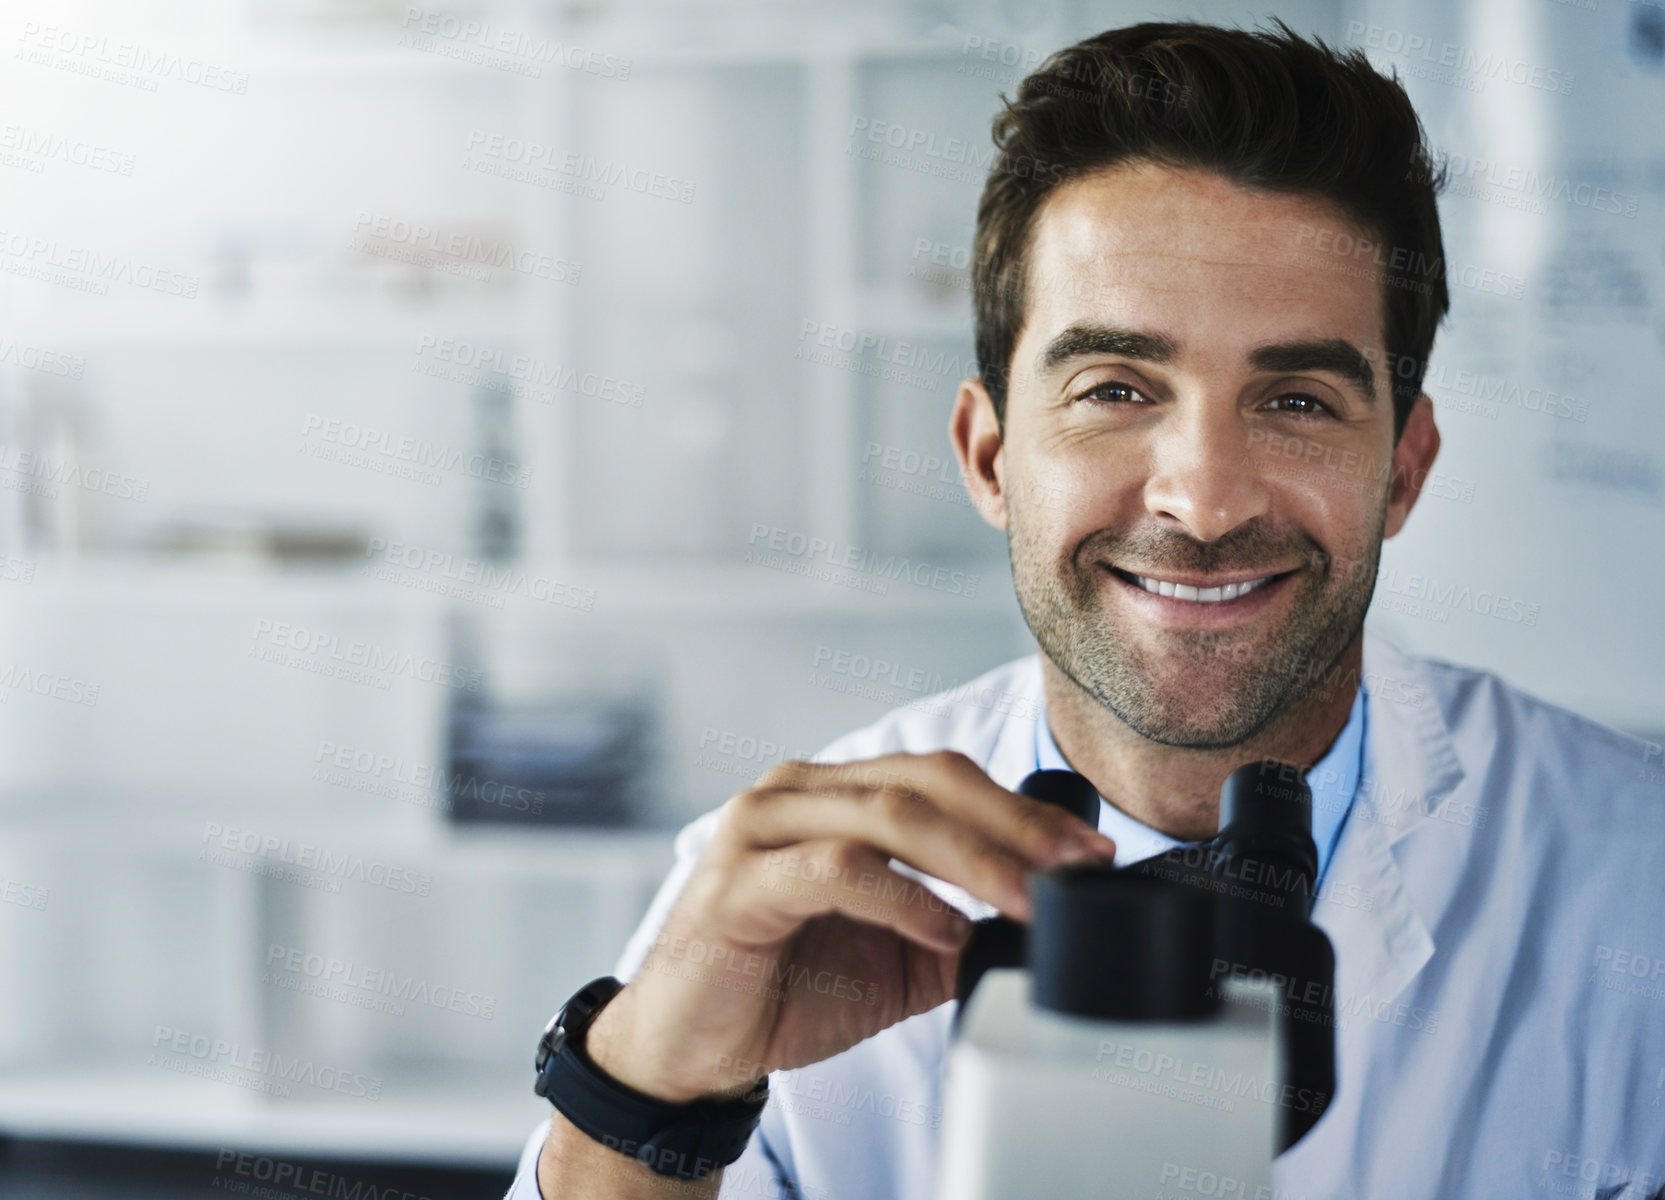 Buy stock photo Portrait of a scientist using a microscope in a lab